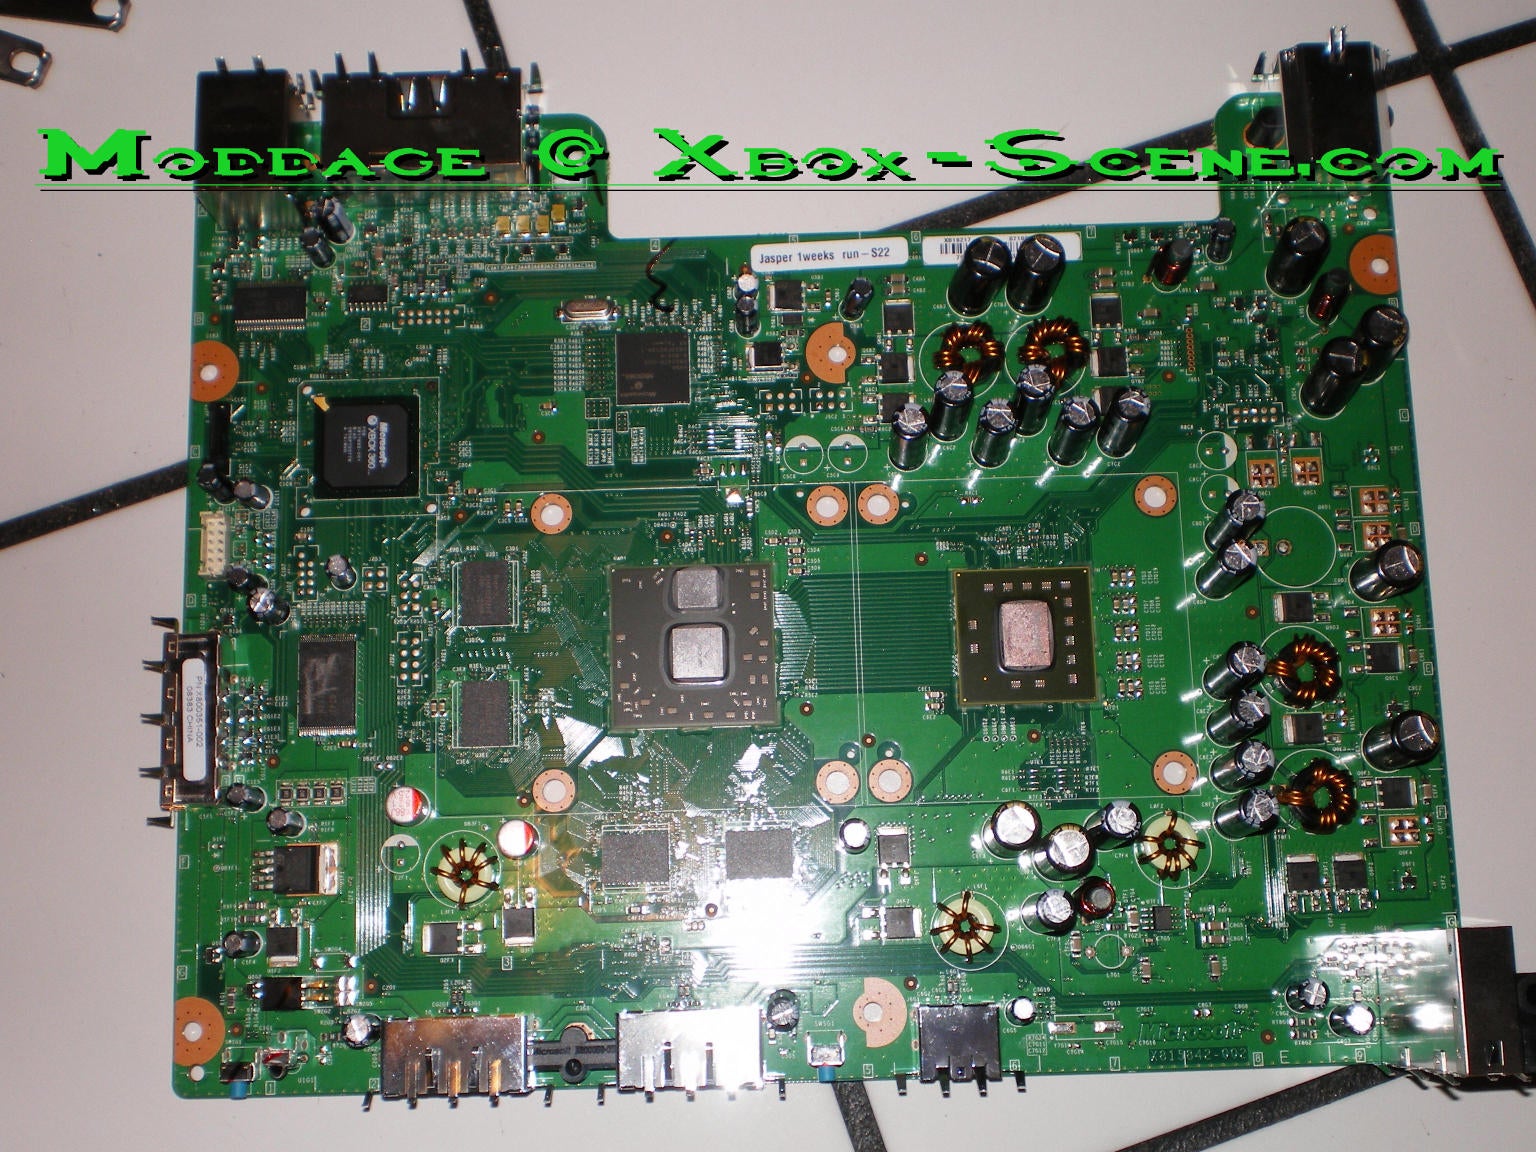 New Xbox 360 Motherboard Leaked, Has 256MB Flash Memory